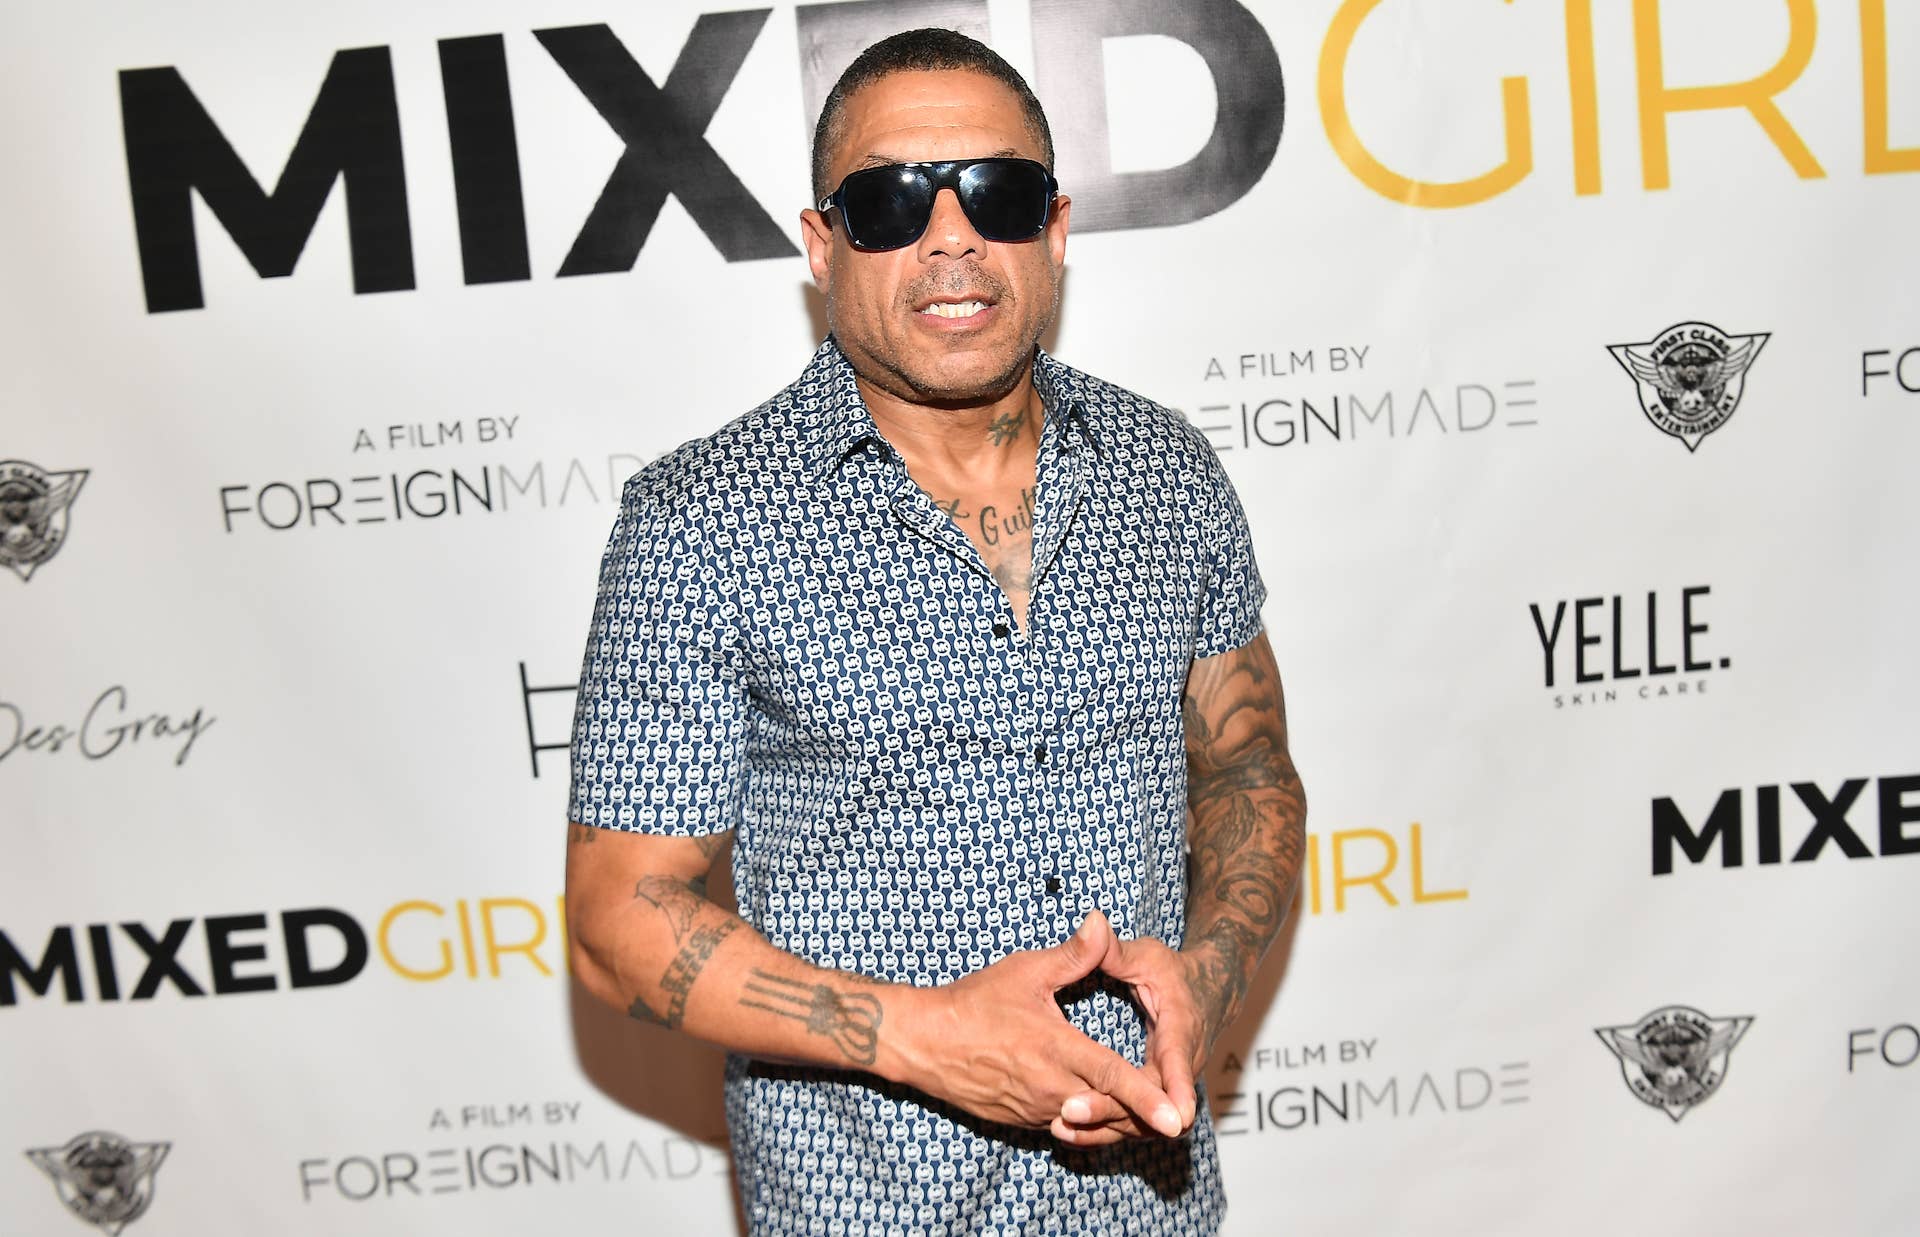 Benzino attends MIXED GIRL event in 2019